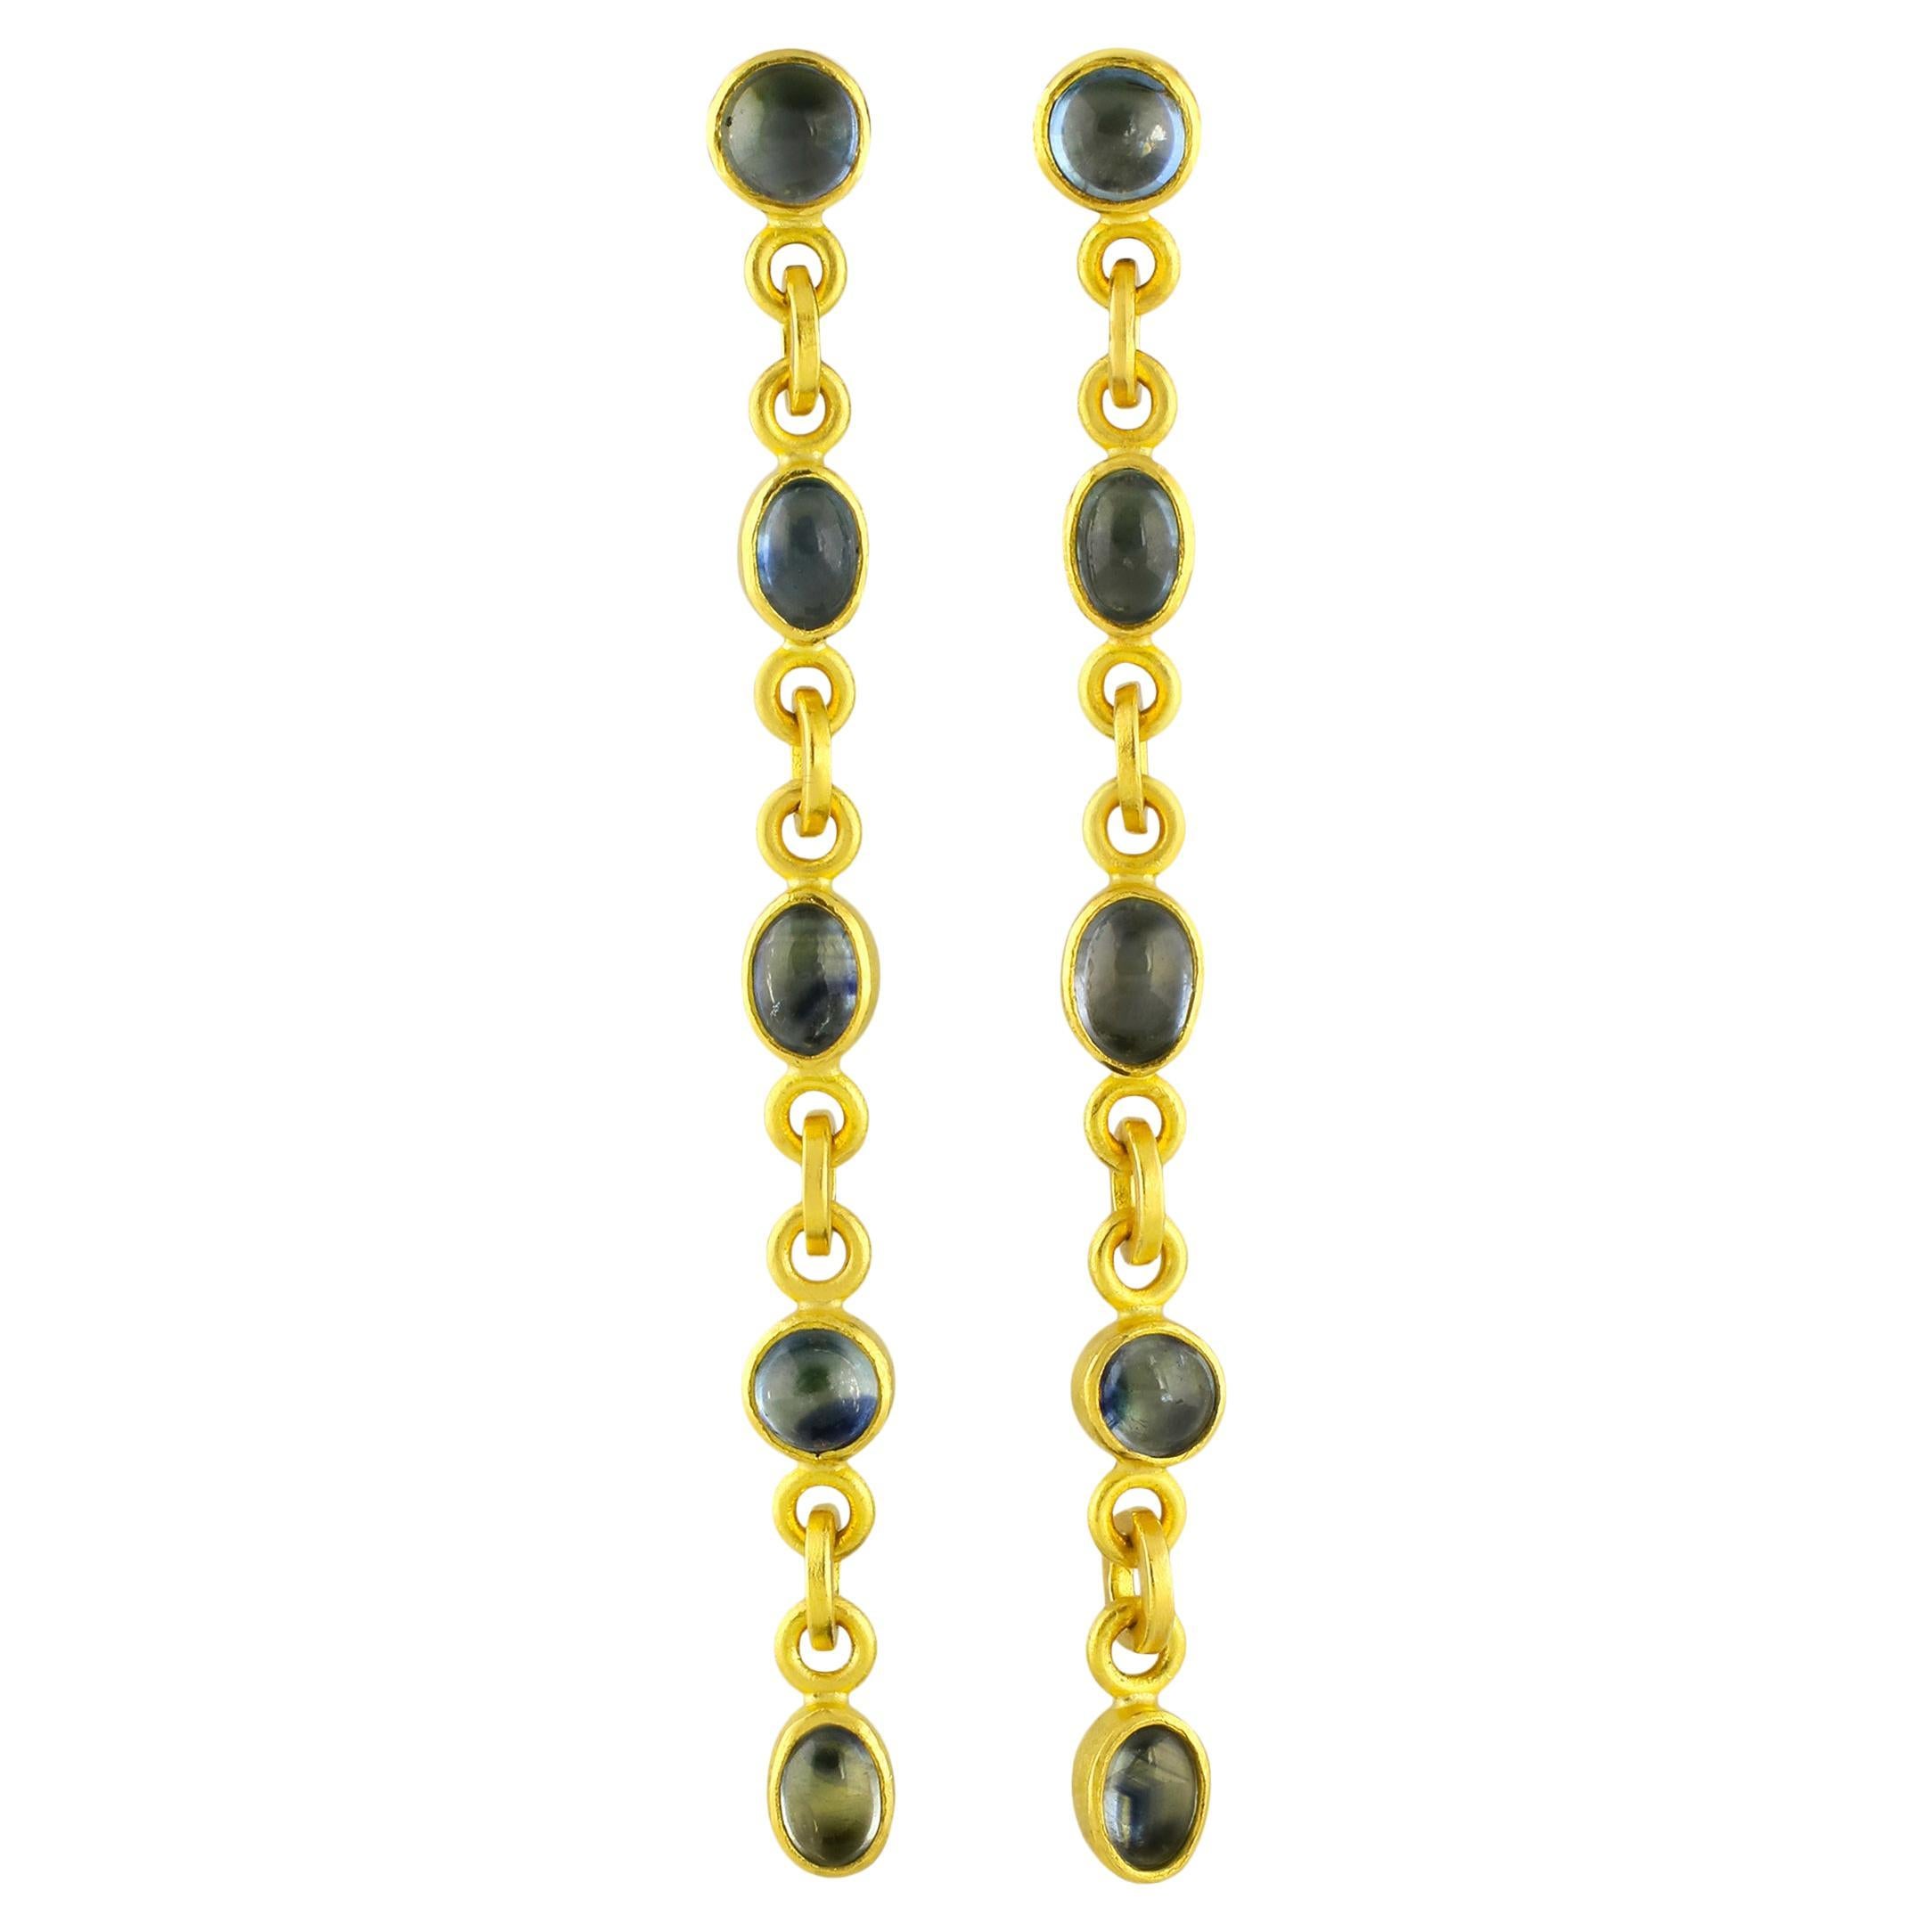 PHILIPPE SPENCER 22K & 20K Gold with 7.97 Ct. Sapphire Statement Earrings